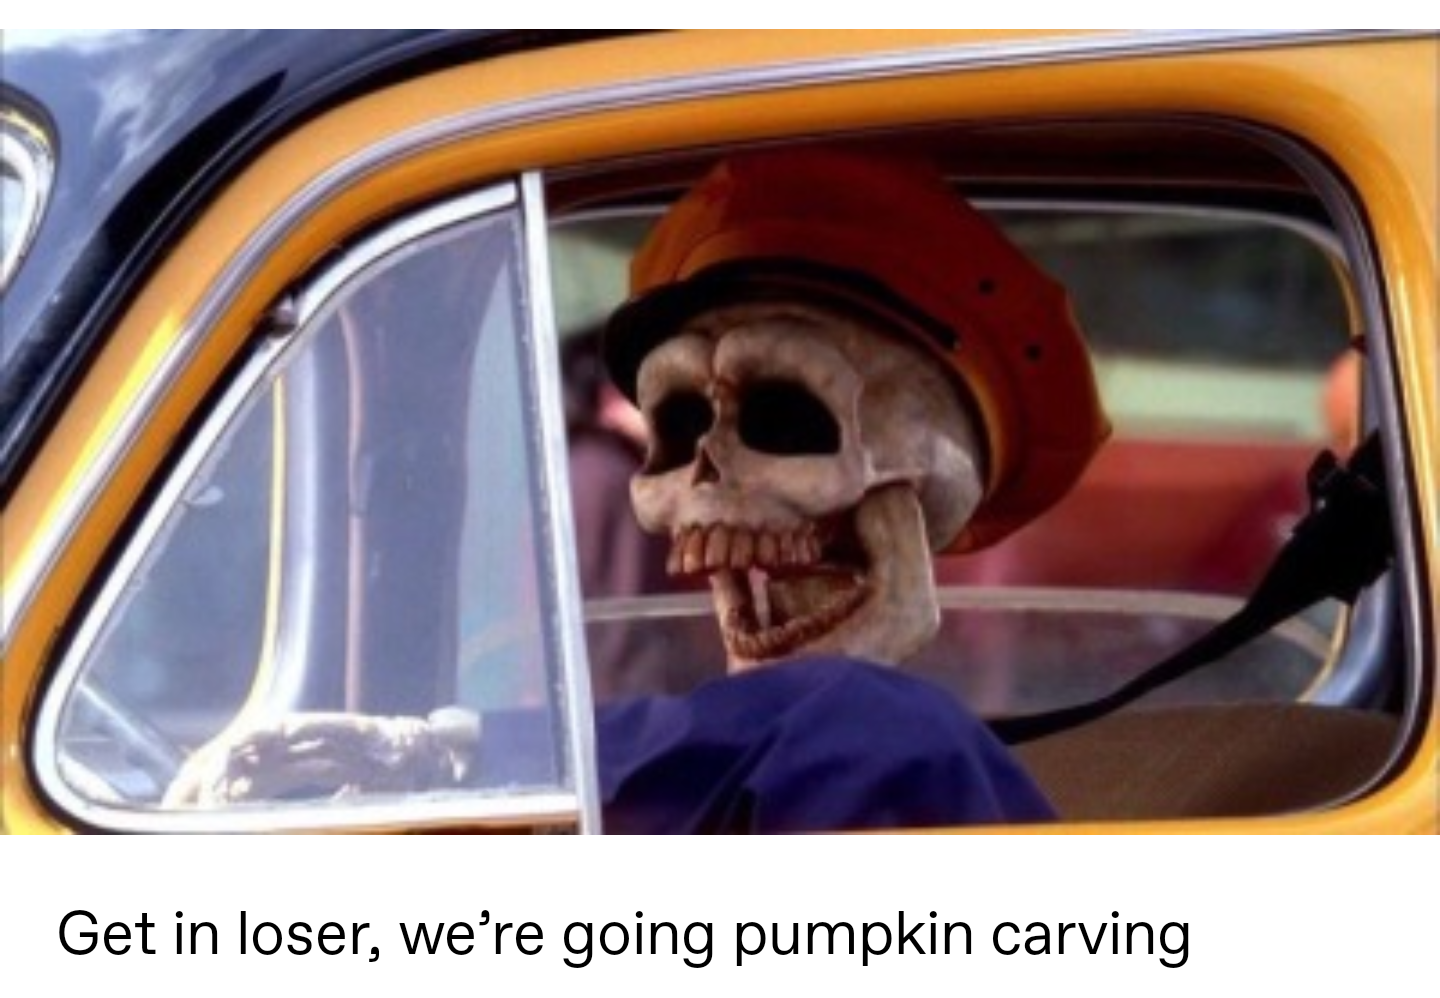 halloween town taxi driver - Get in loser, we're going pumpkin carving